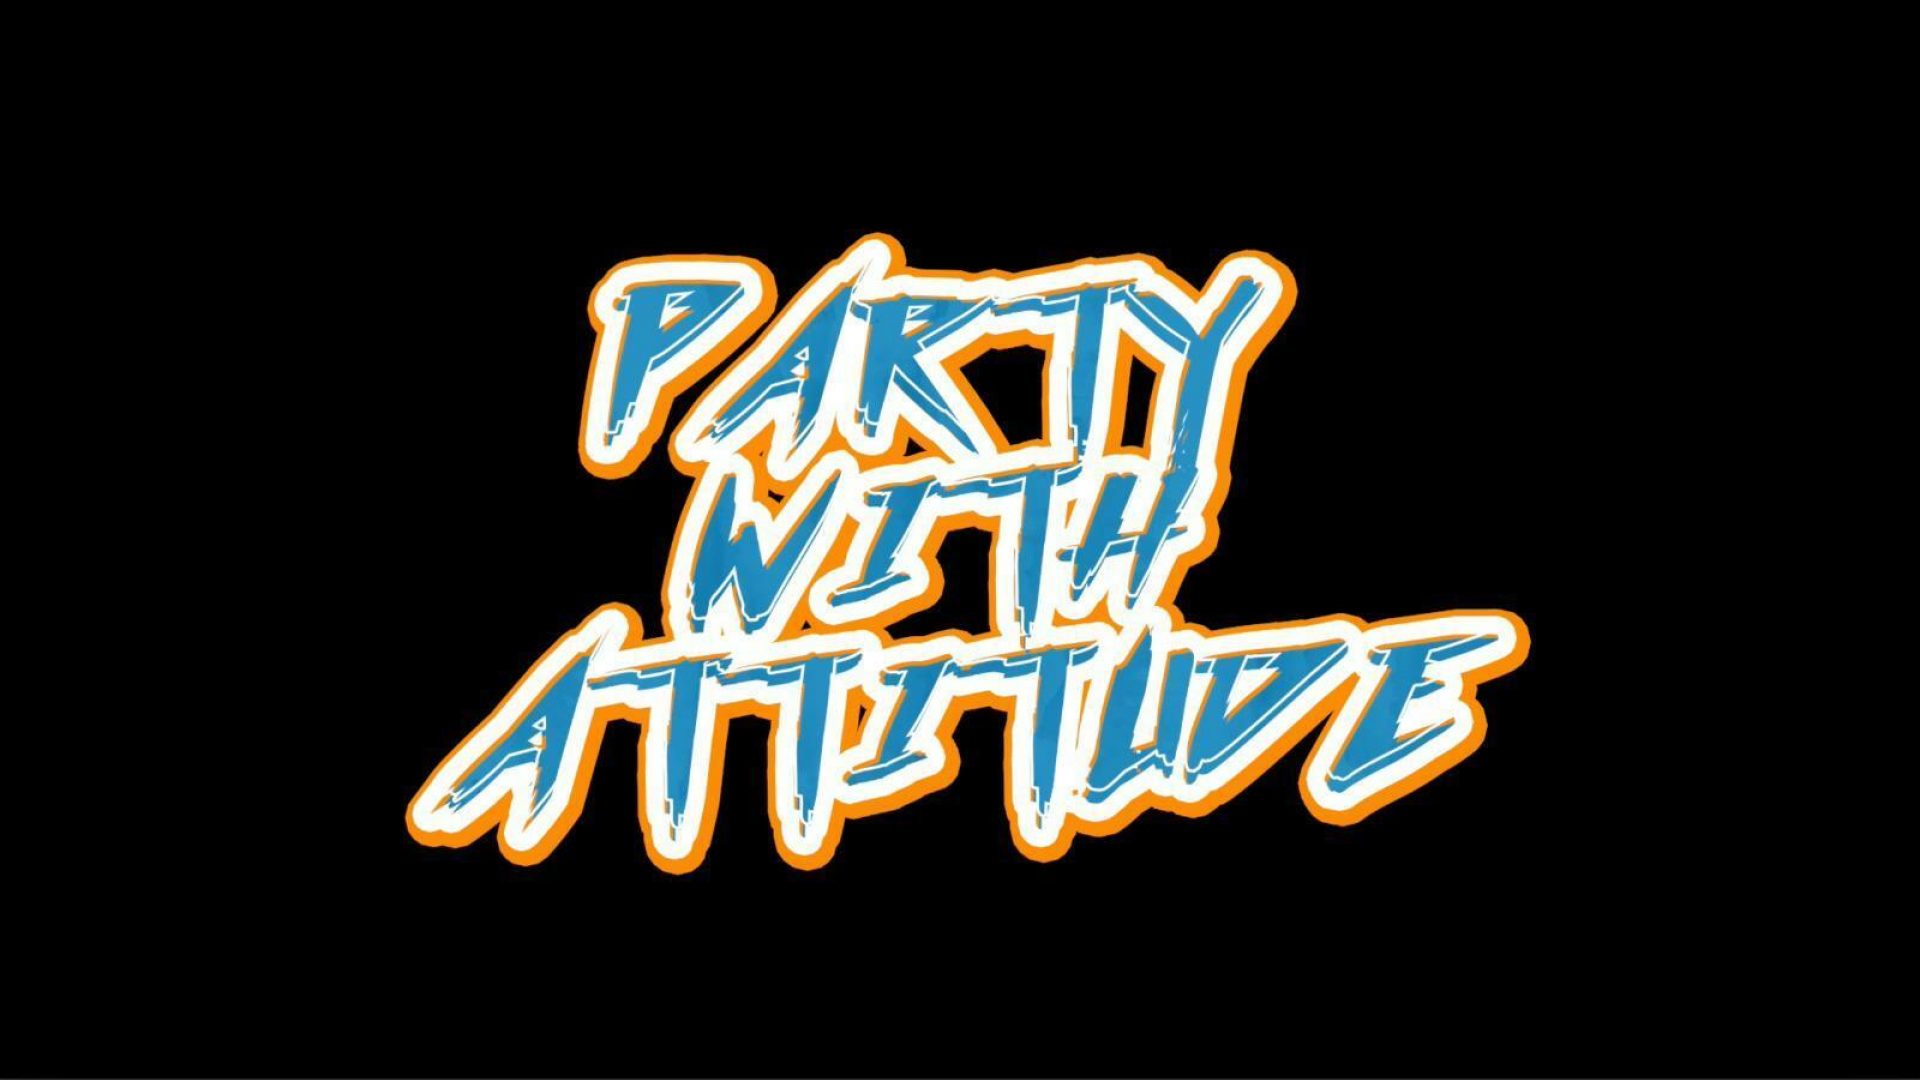 Party With Attitude